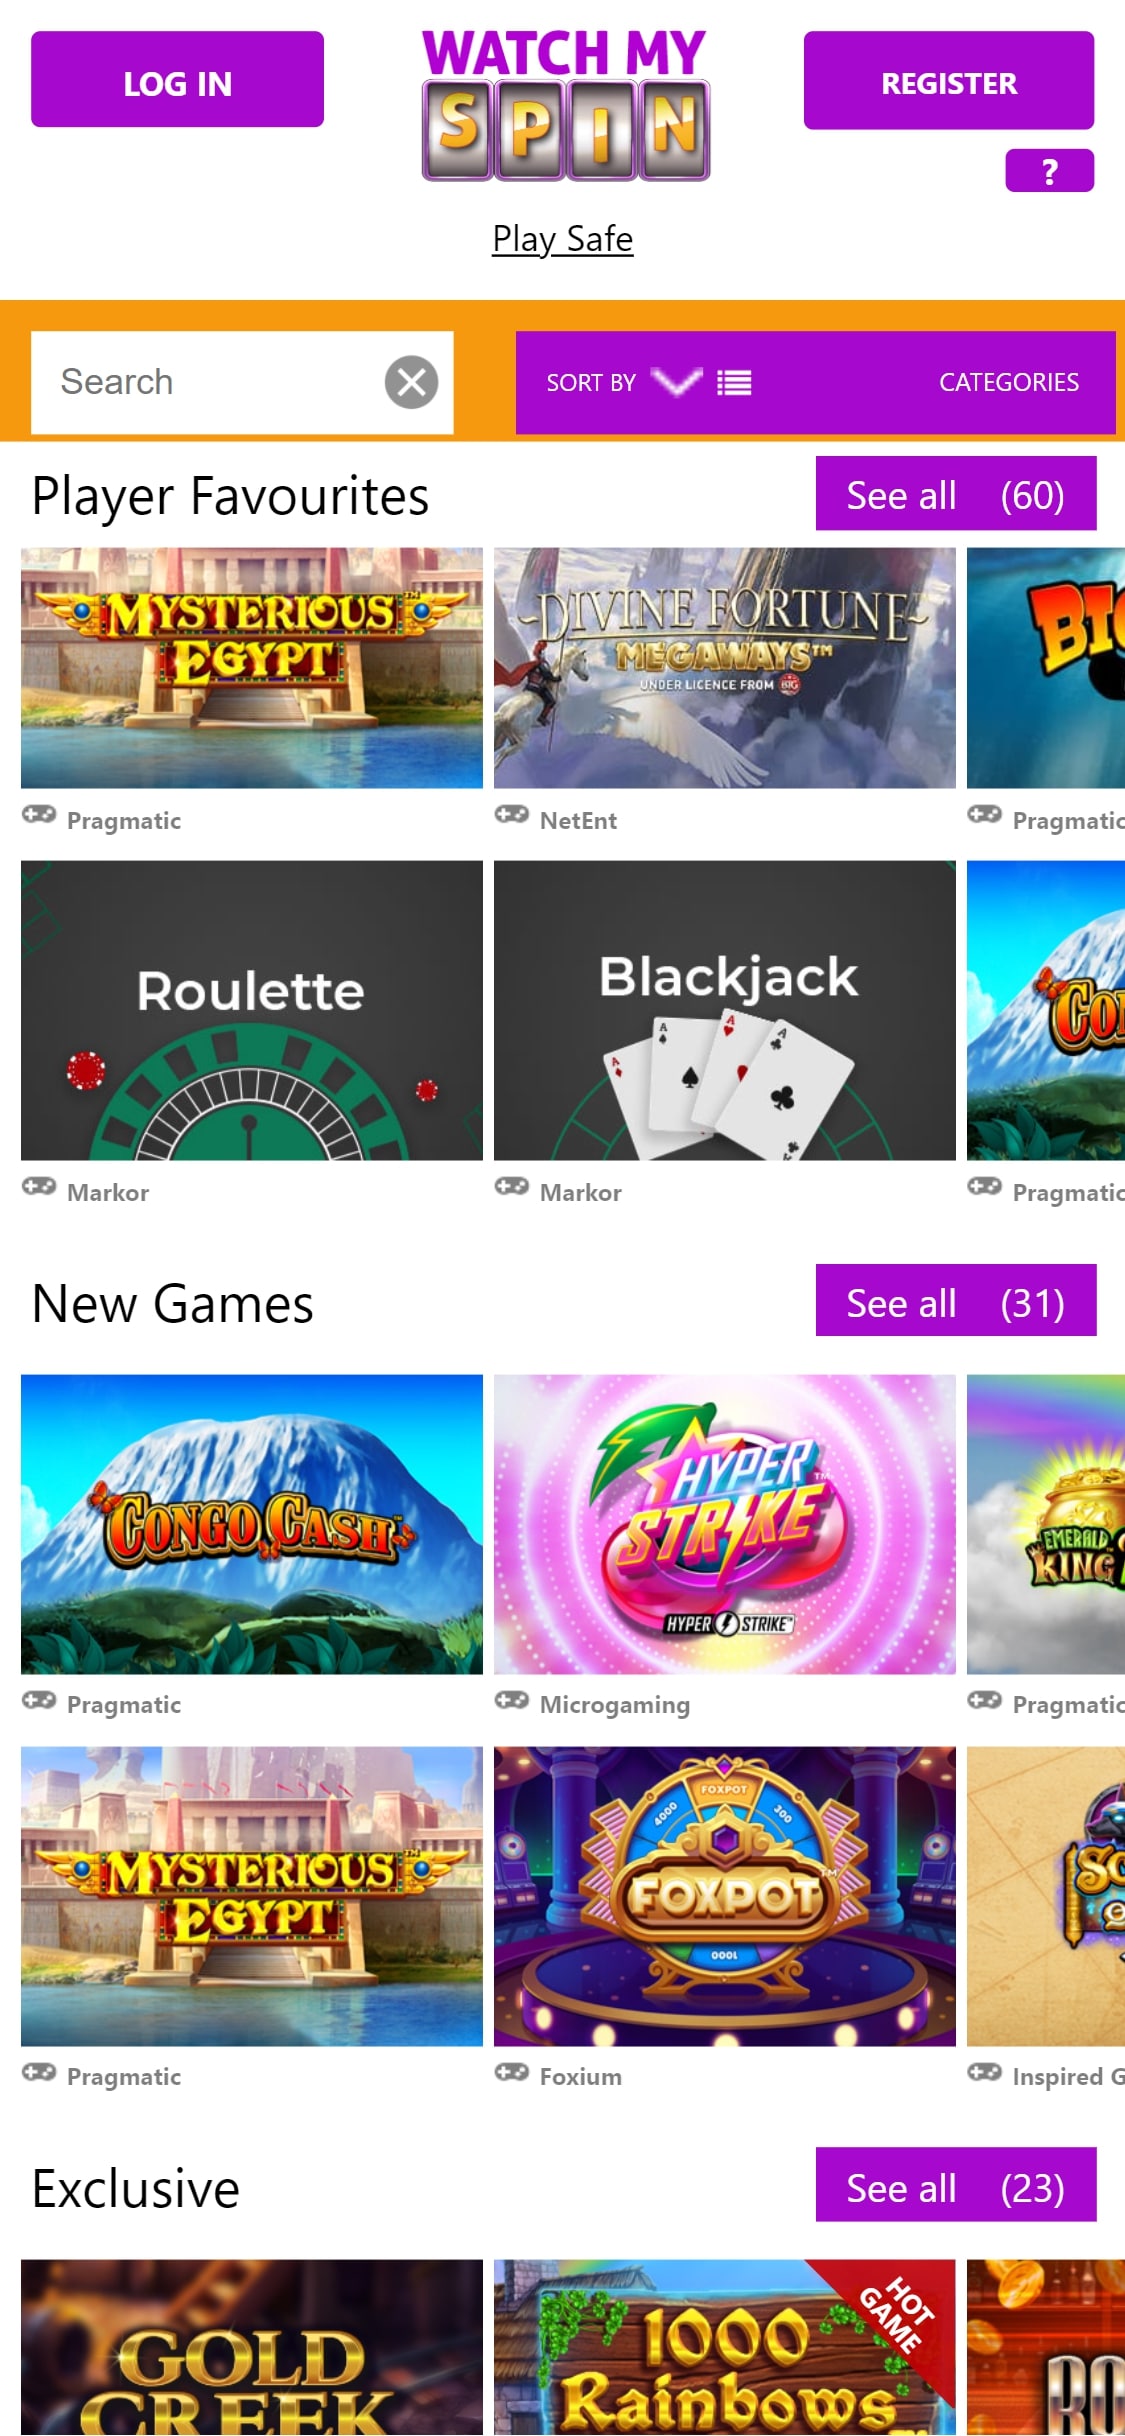 WatchMySpin Casino Mobile Games Review